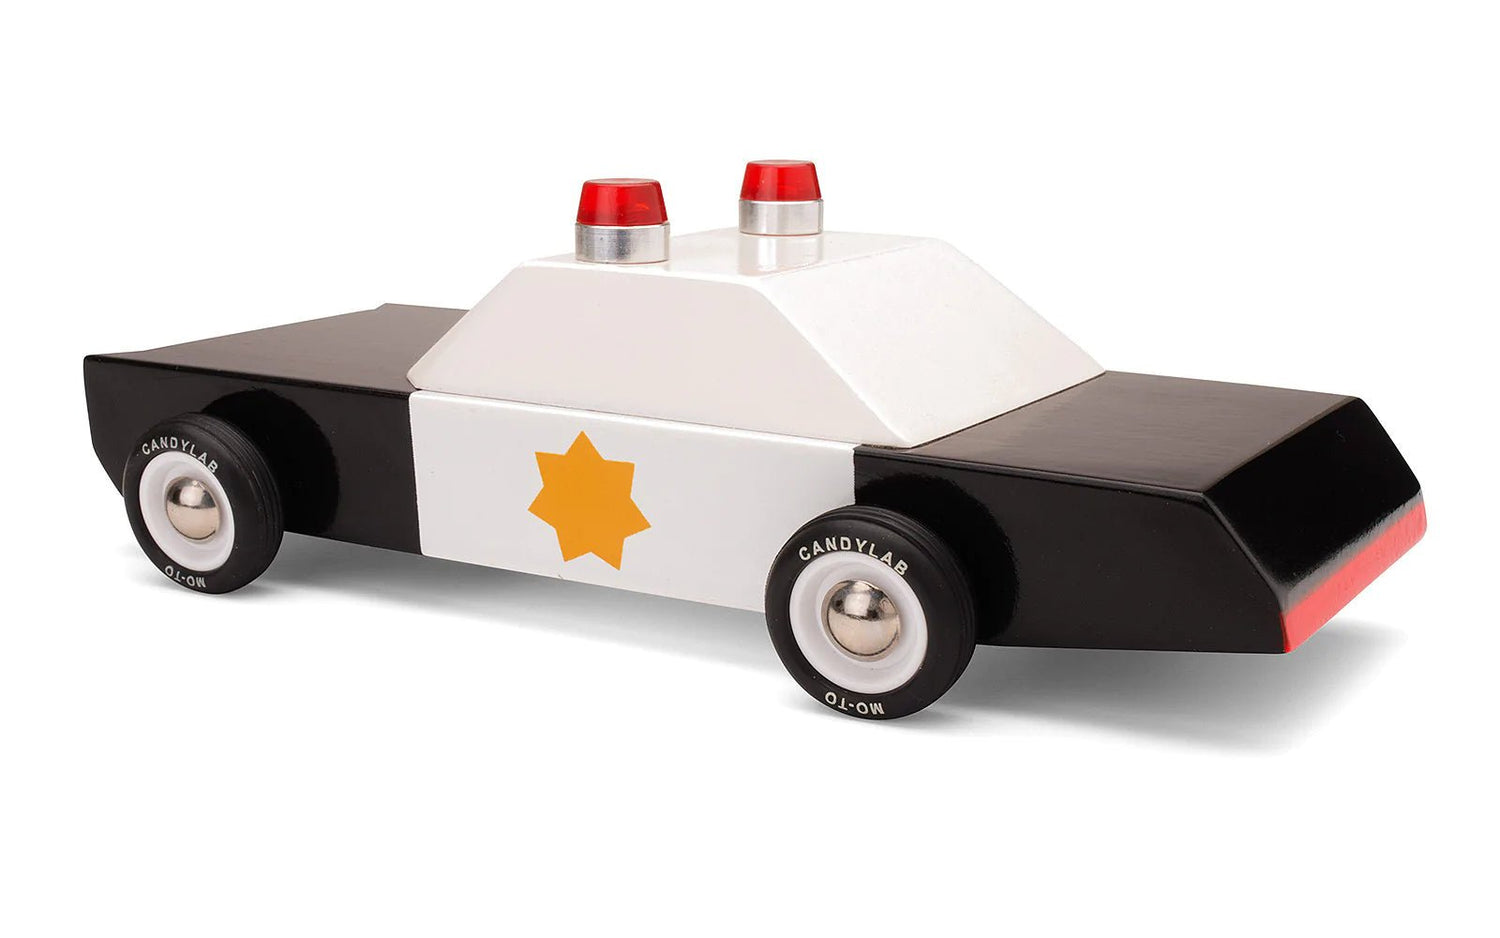 CANDYLAB POLICE CRUISER by CANDYLAB - The Playful Collective